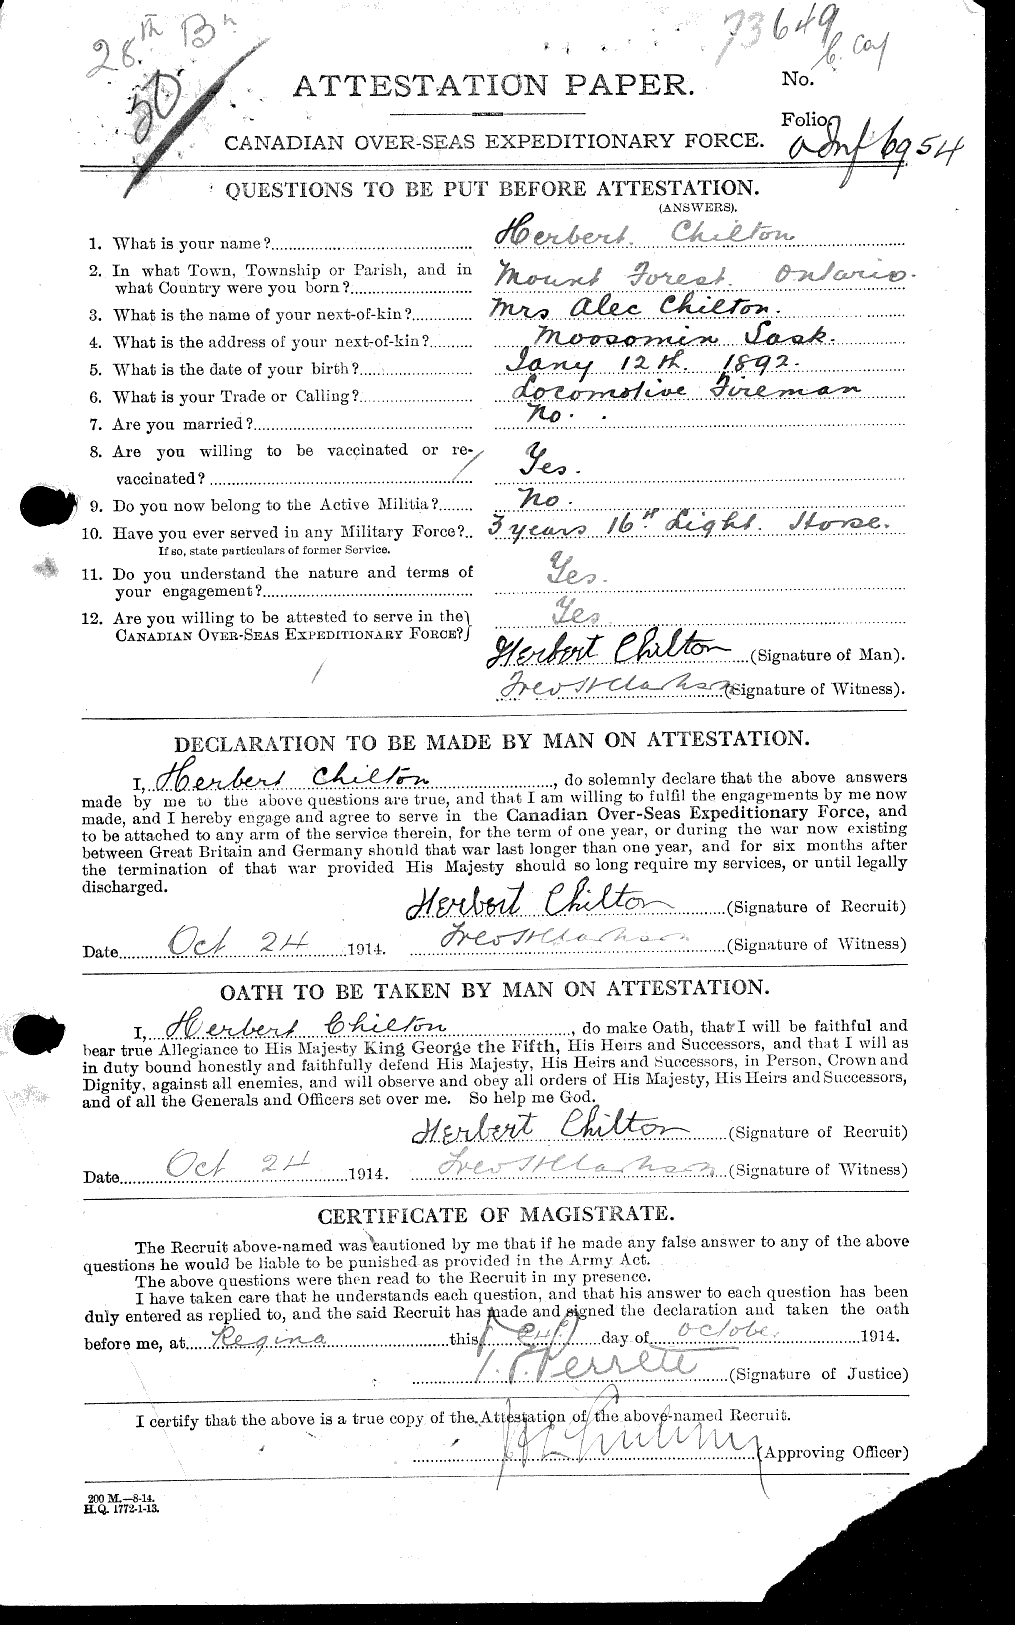 Personnel Records of the First World War - CEF 014553a